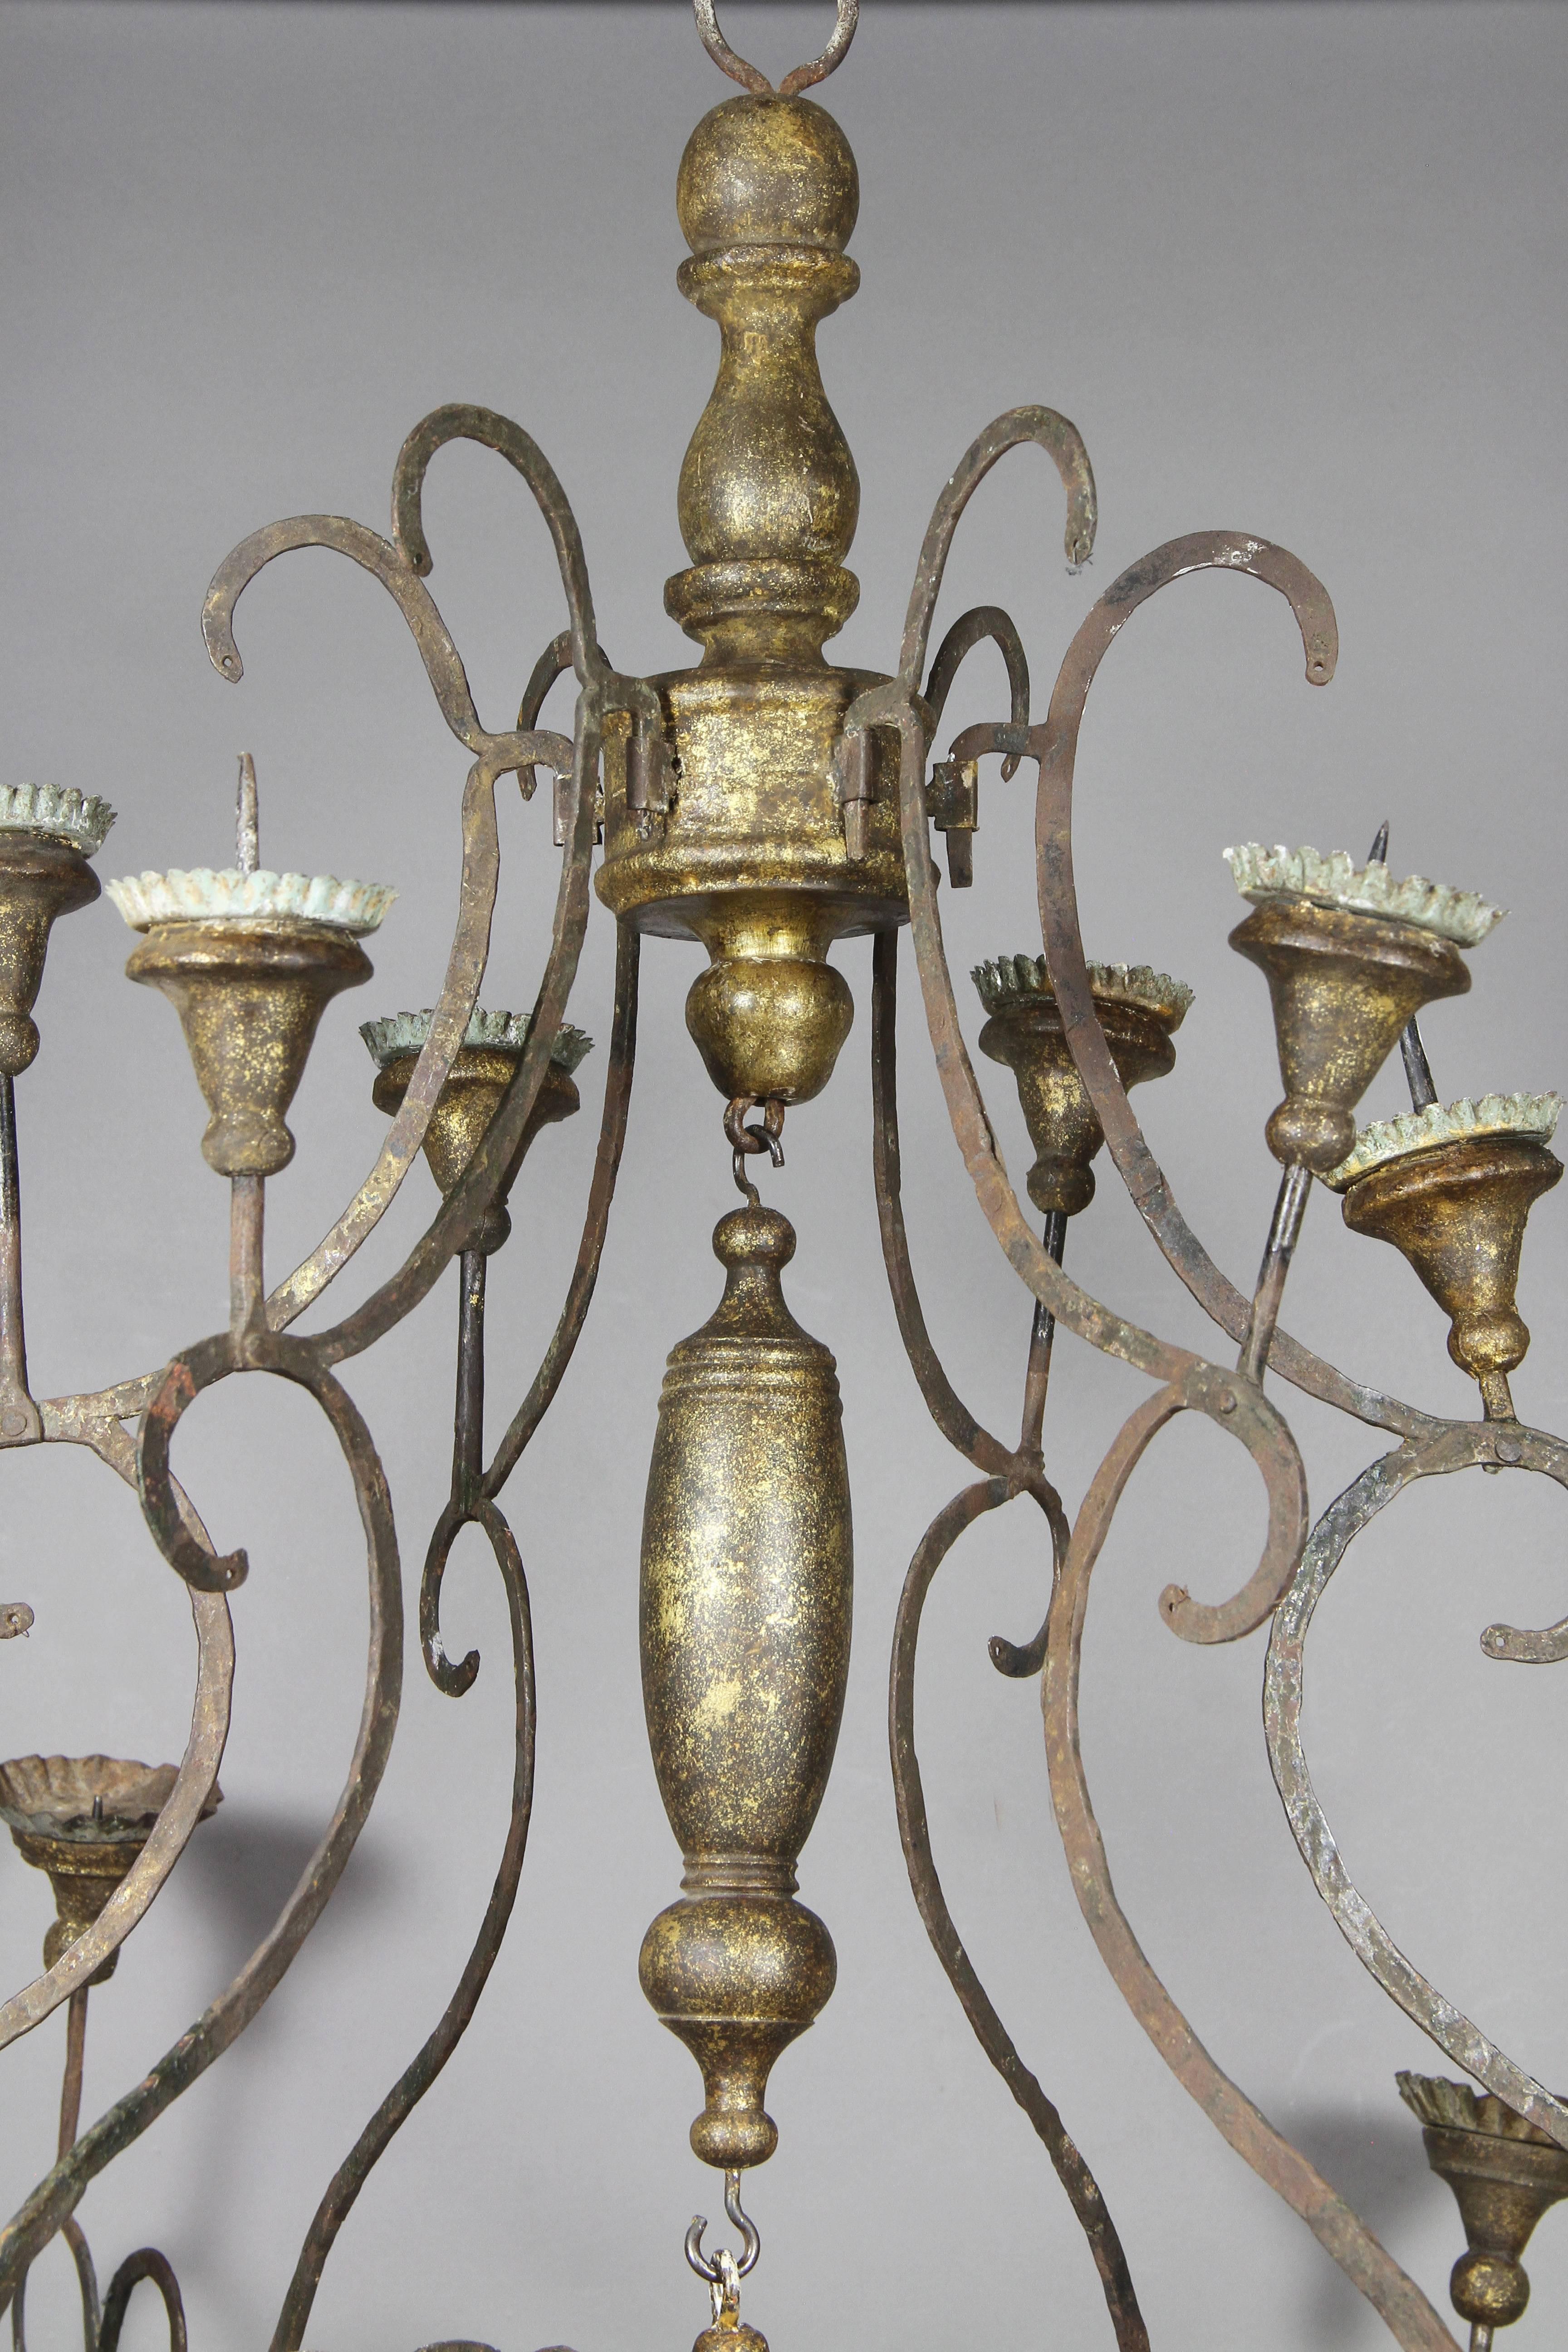 Two-tier with 12 candleholders, flattened wrought iron arms. Not wired.